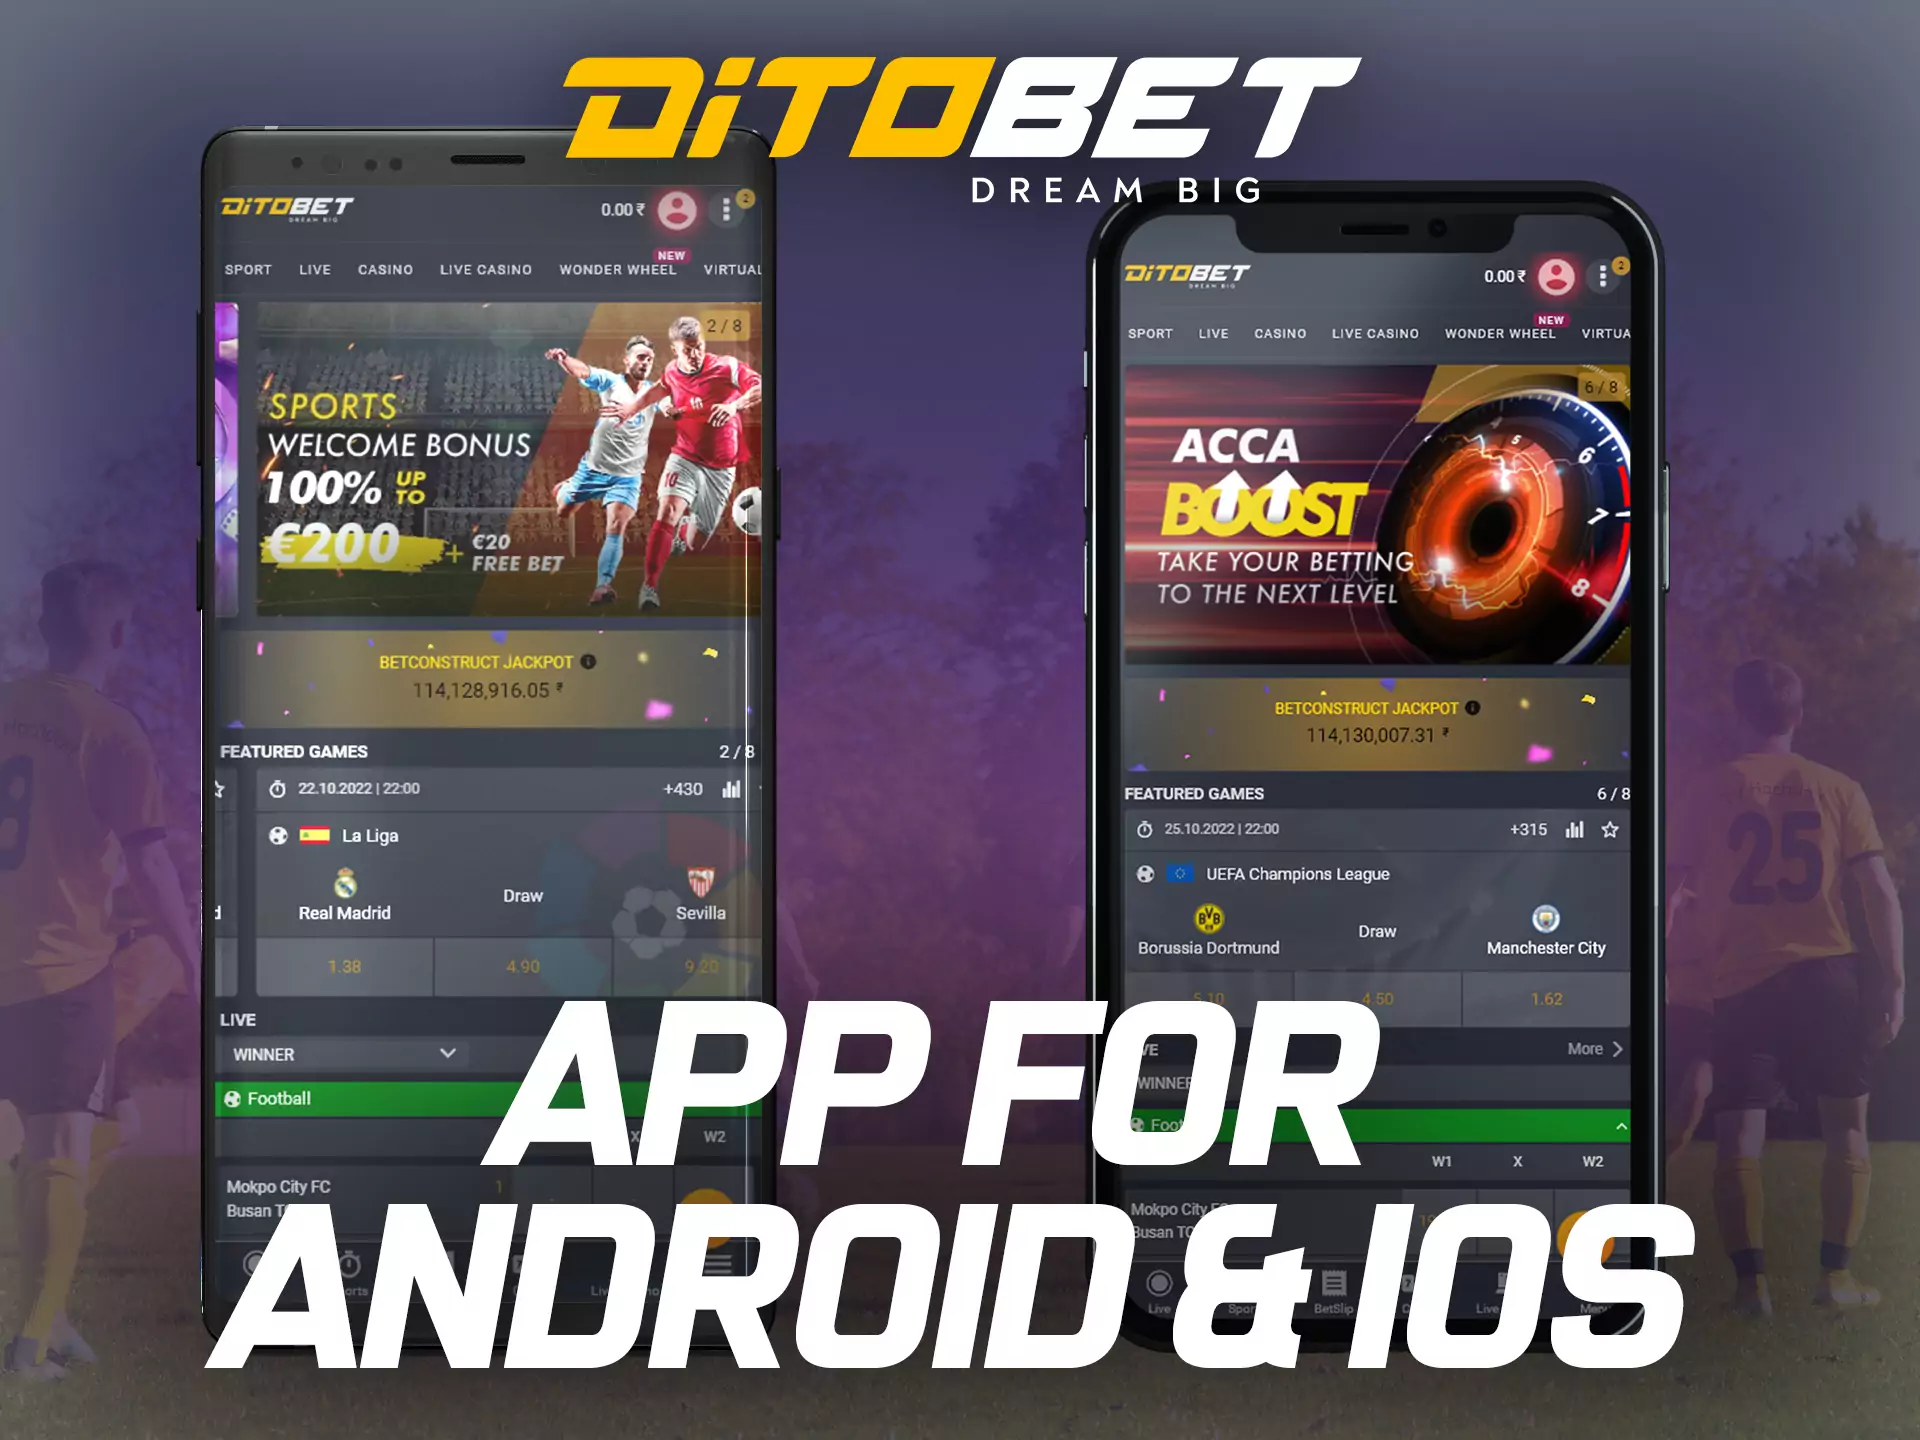 Play and place bets on Ditobet from any Android and iOS mobile device.